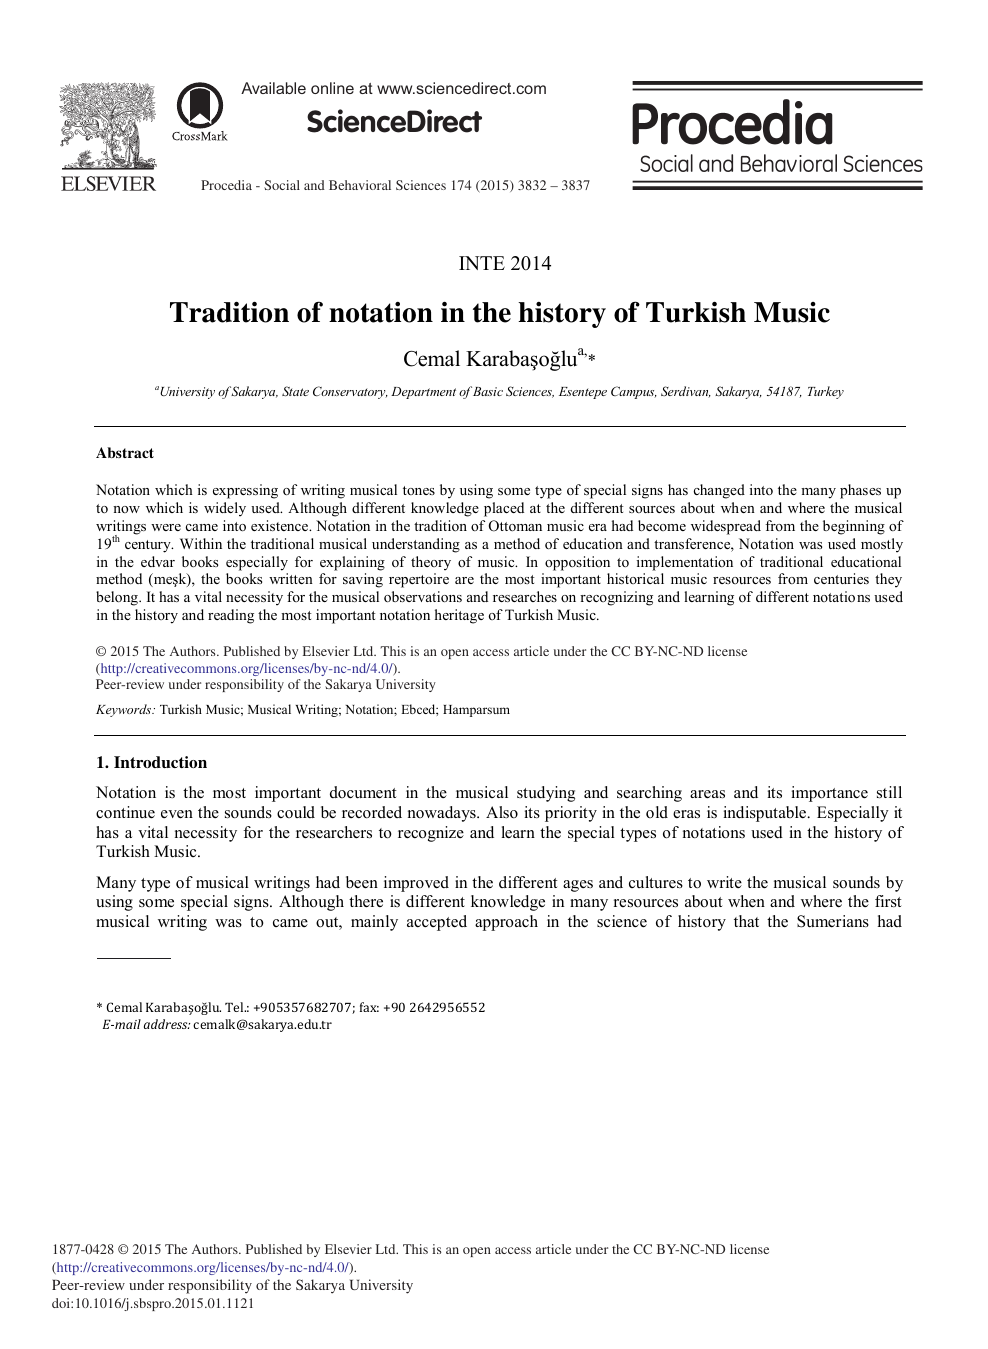 Tradition of Notation in the History of Turkish Music – topic of